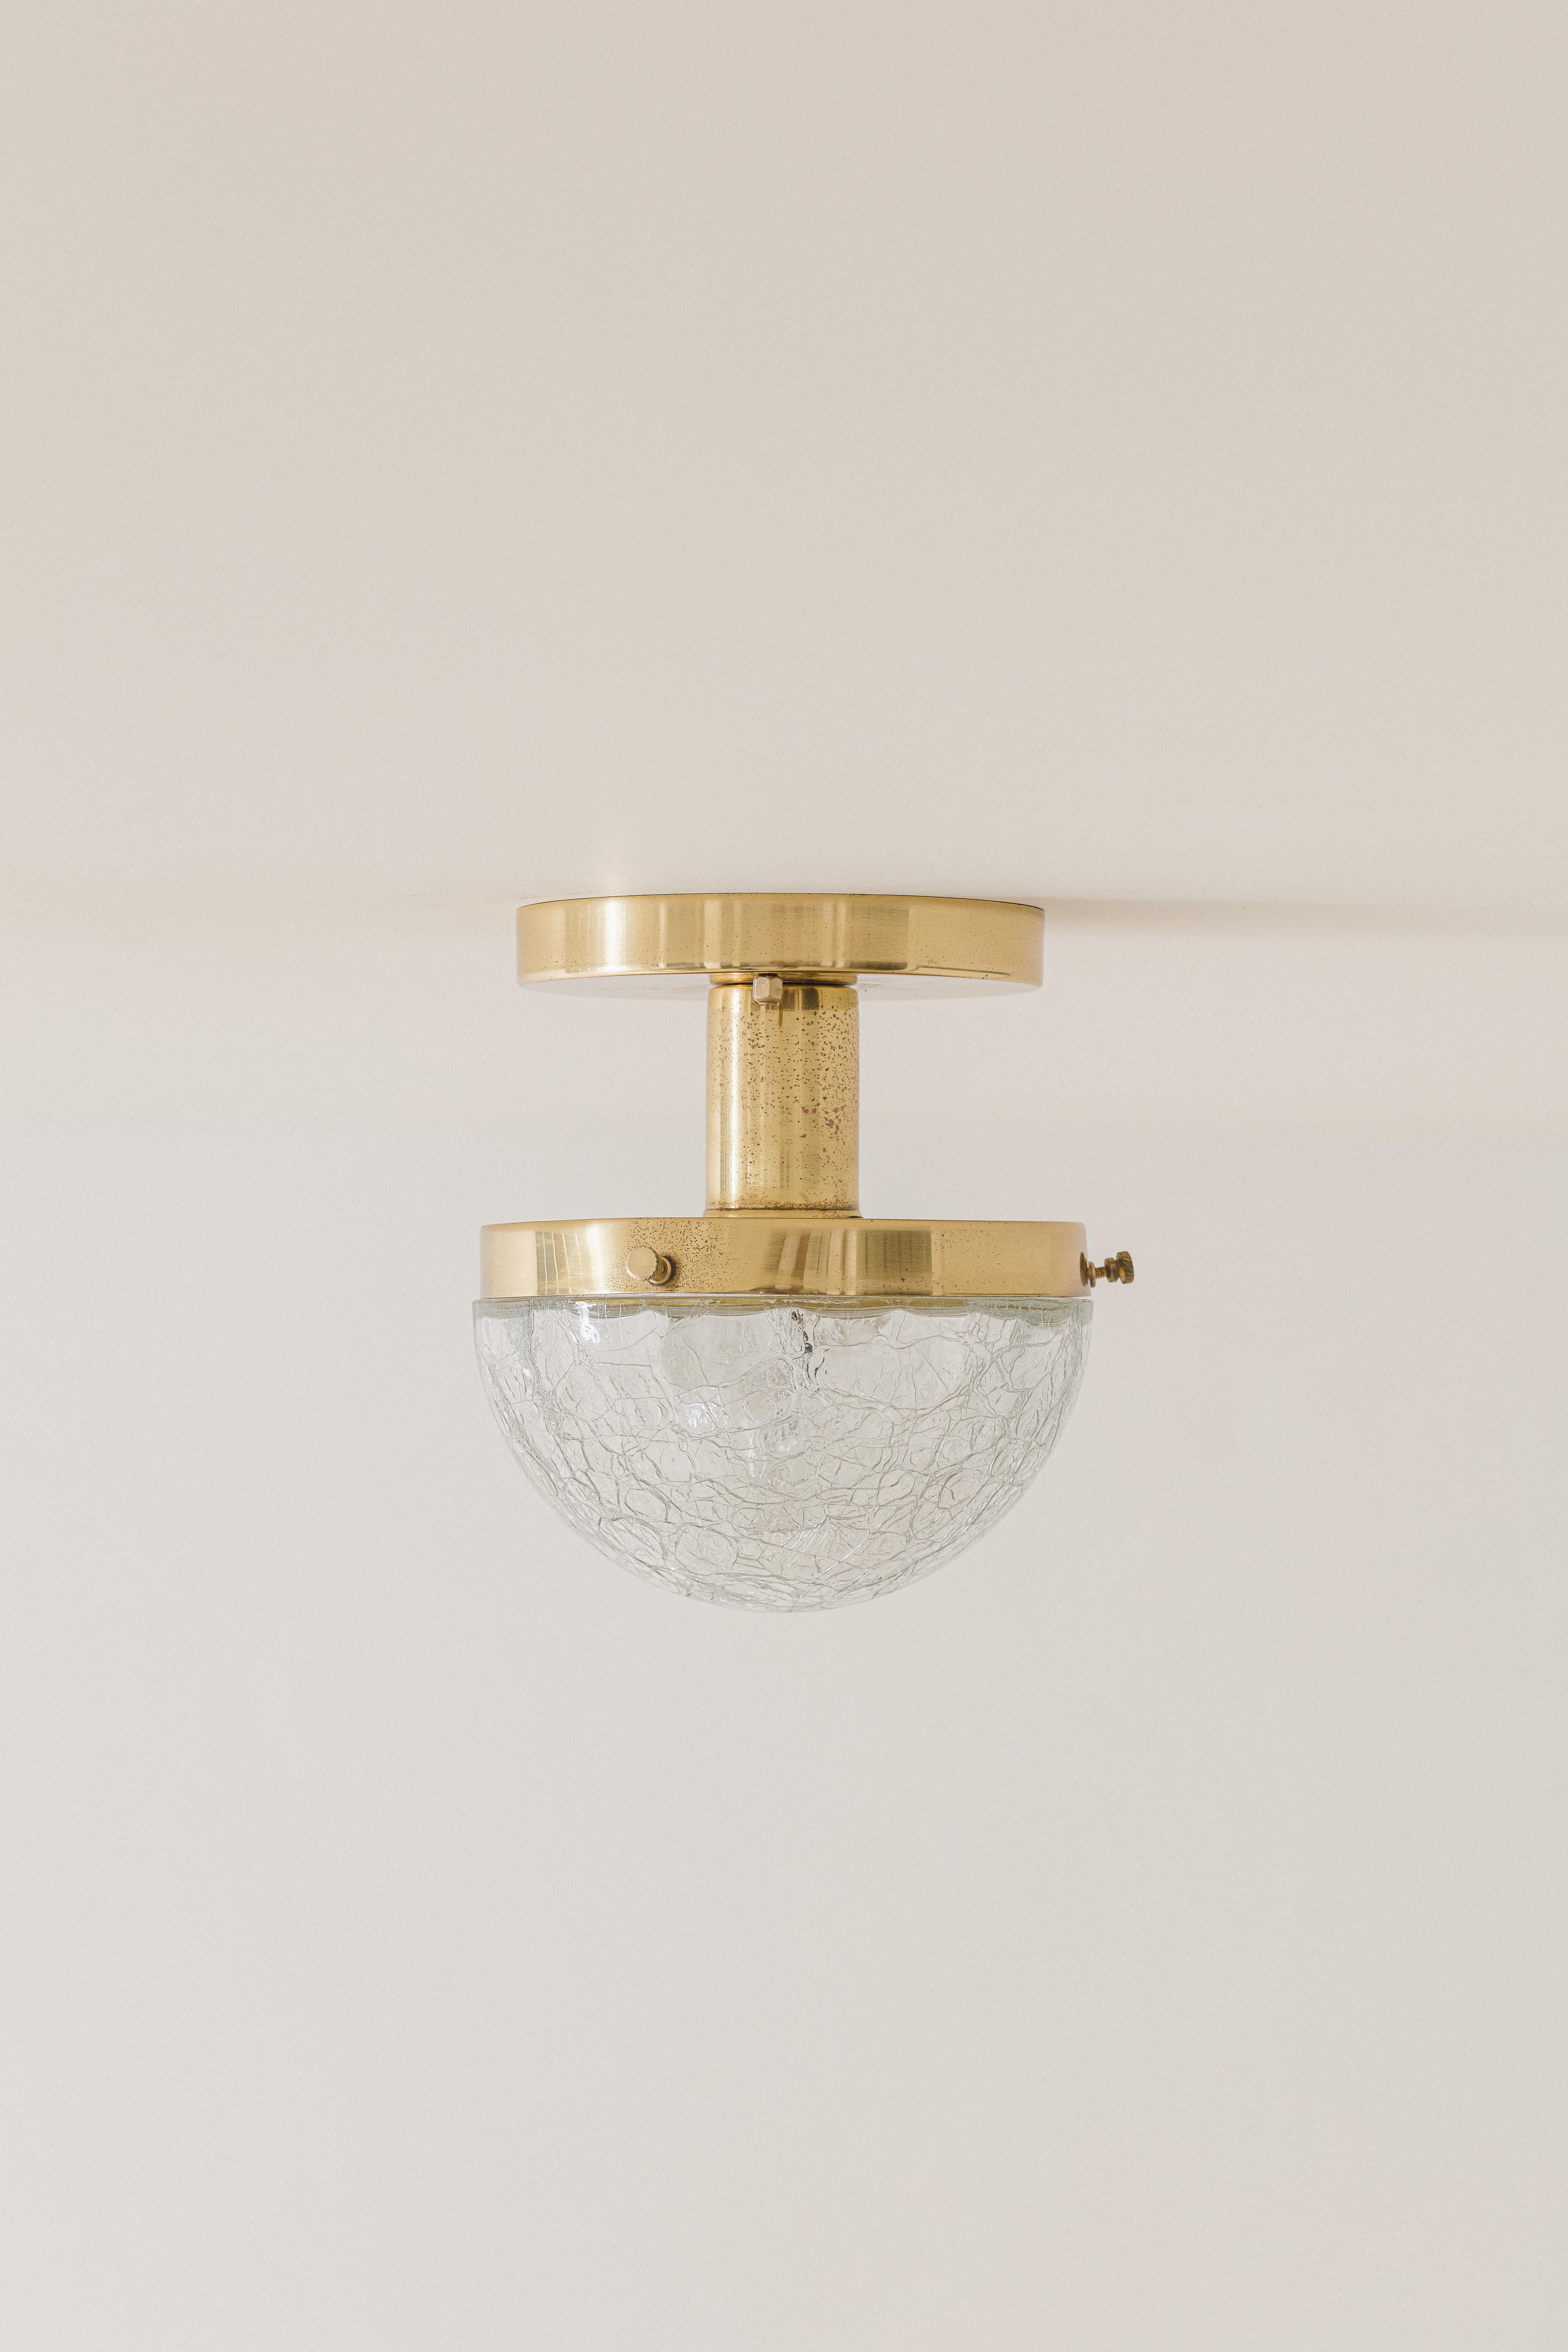 Mid-20th Century Wall /Ceiling Lamp, Design by Carlo Montalto & Filhos, Midcentury, Brazil, 1960s For Sale